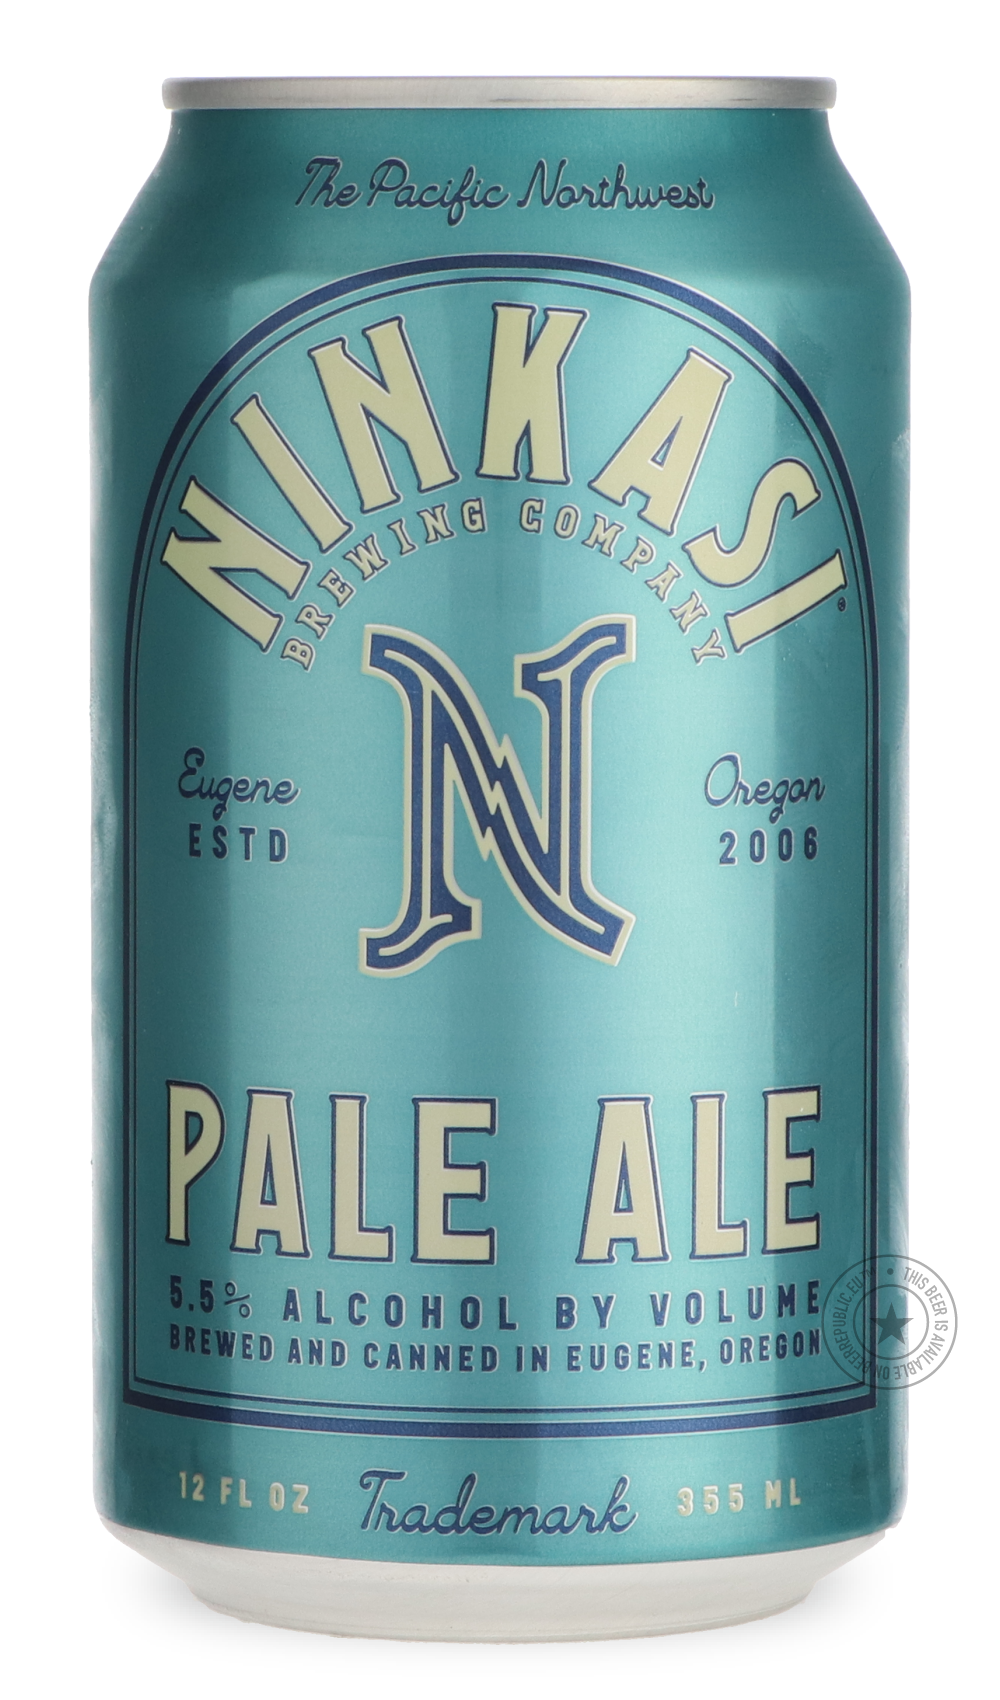 -Ninkasi- Pale Ale-Pale- Only @ Beer Republic - The best online beer store for American & Canadian craft beer - Buy beer online from the USA and Canada - Bier online kopen - Amerikaans bier kopen - Craft beer store - Craft beer kopen - Amerikanisch bier kaufen - Bier online kaufen - Acheter biere online - IPA - Stout - Porter - New England IPA - Hazy IPA - Imperial Stout - Barrel Aged - Barrel Aged Imperial Stout - Brown - Dark beer - Blond - Blonde - Pilsner - Lager - Wheat - Weizen - Amber - Barley Wine -